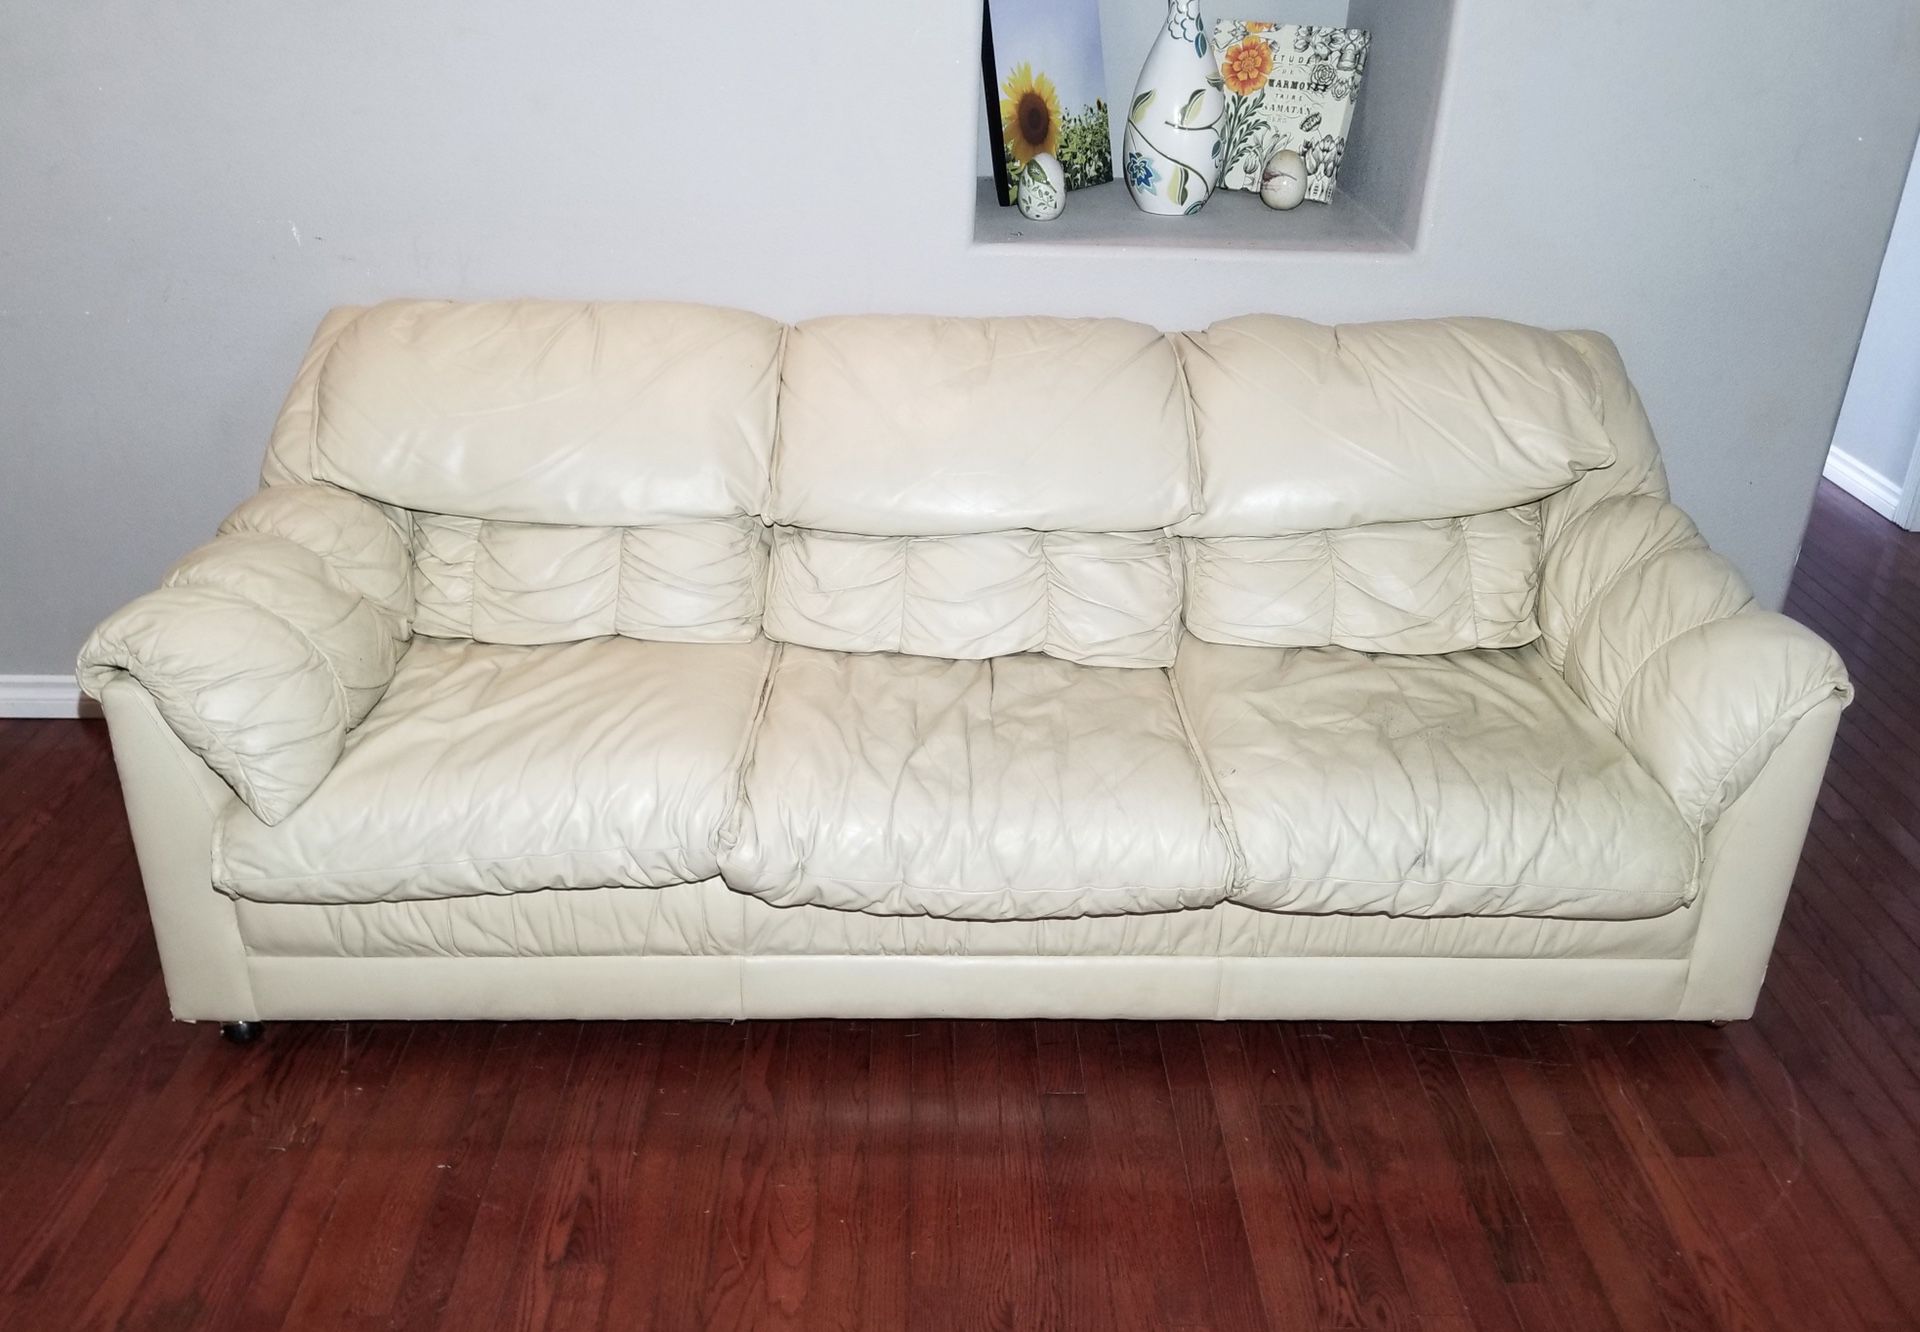 Cameo Furn. Mfg. Light Beige Genuine Leather 3-Seat Couch